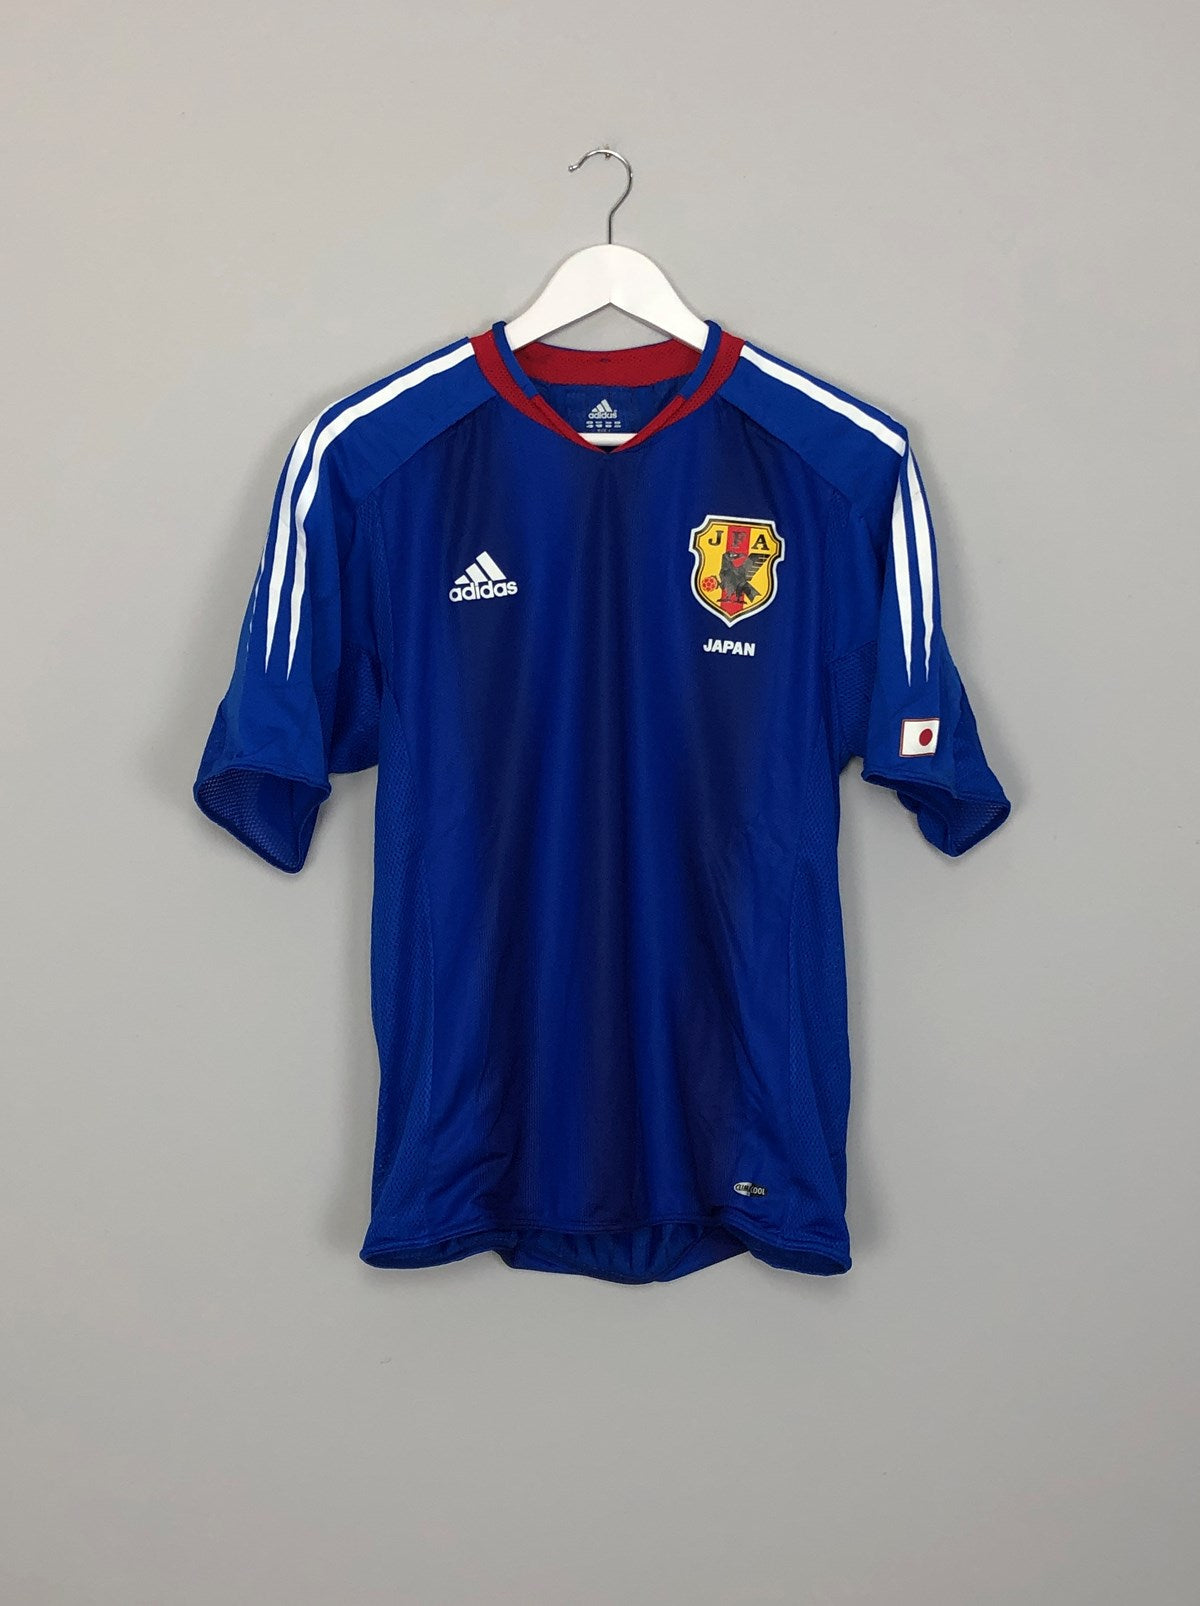 Cult Kits - 2004/06 JAPAN *PLAYER ISSUE* HOME SHIRT (S) ADIDAS